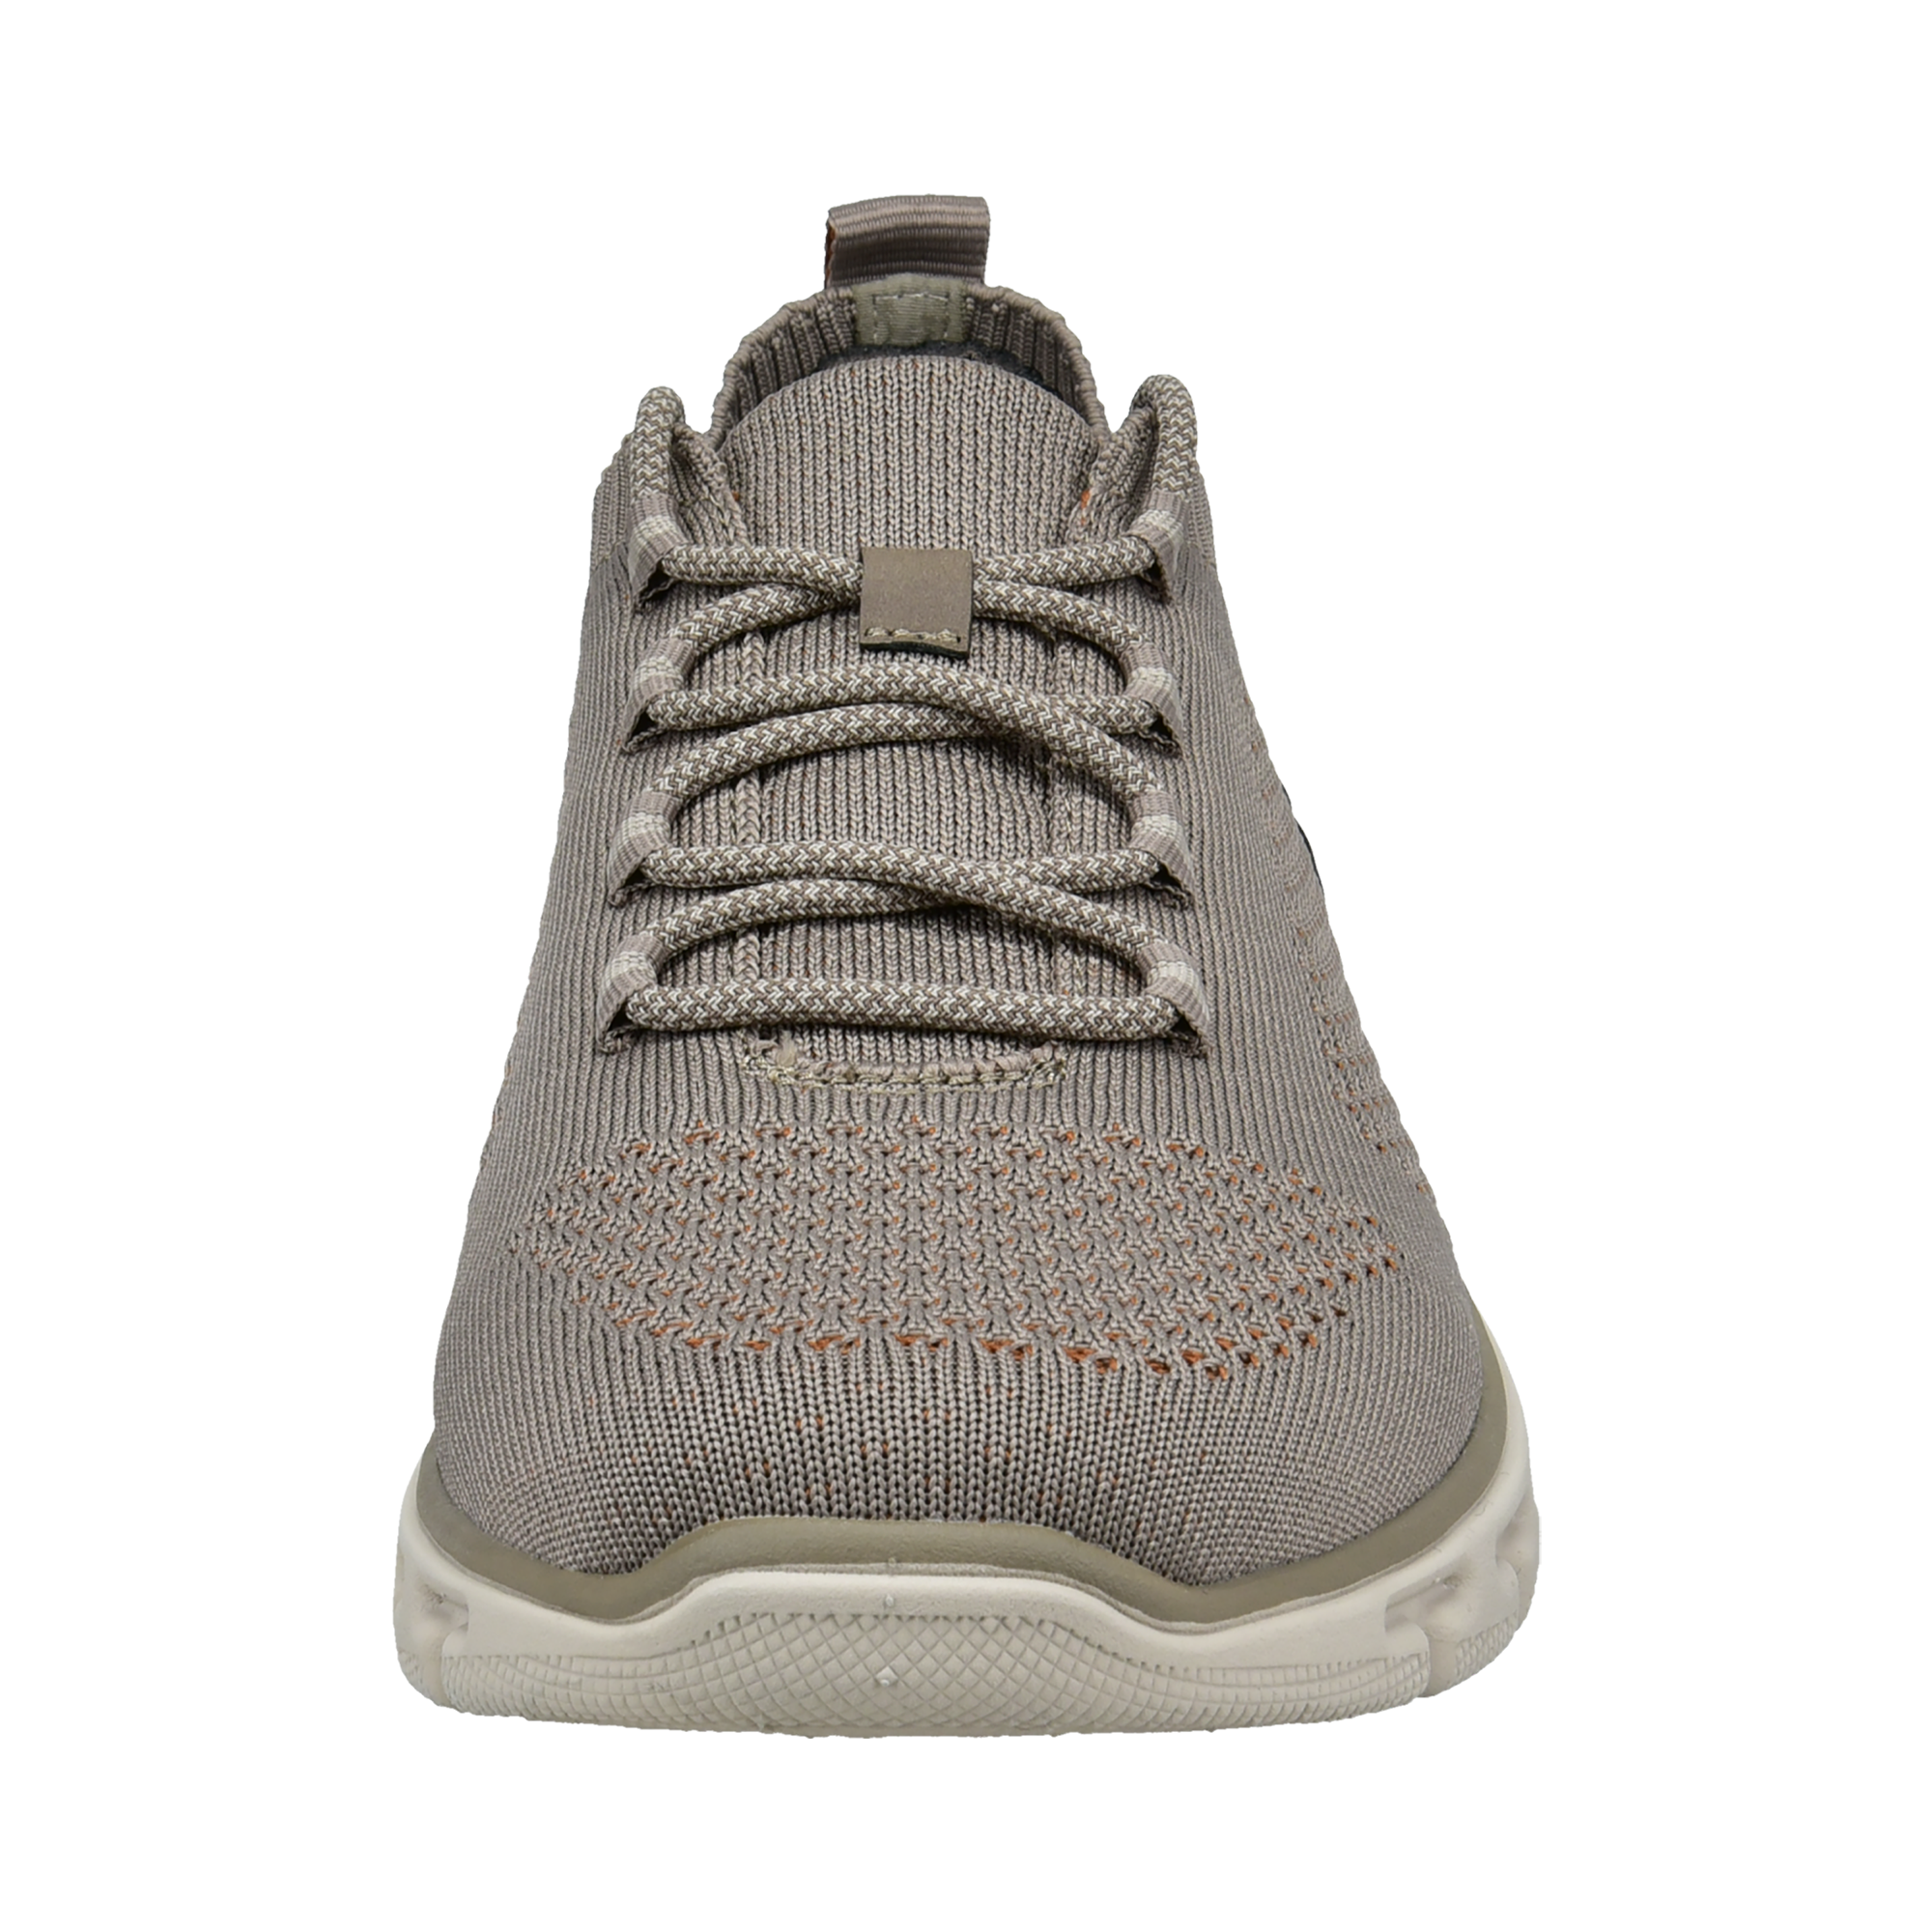 Sneaker taupe